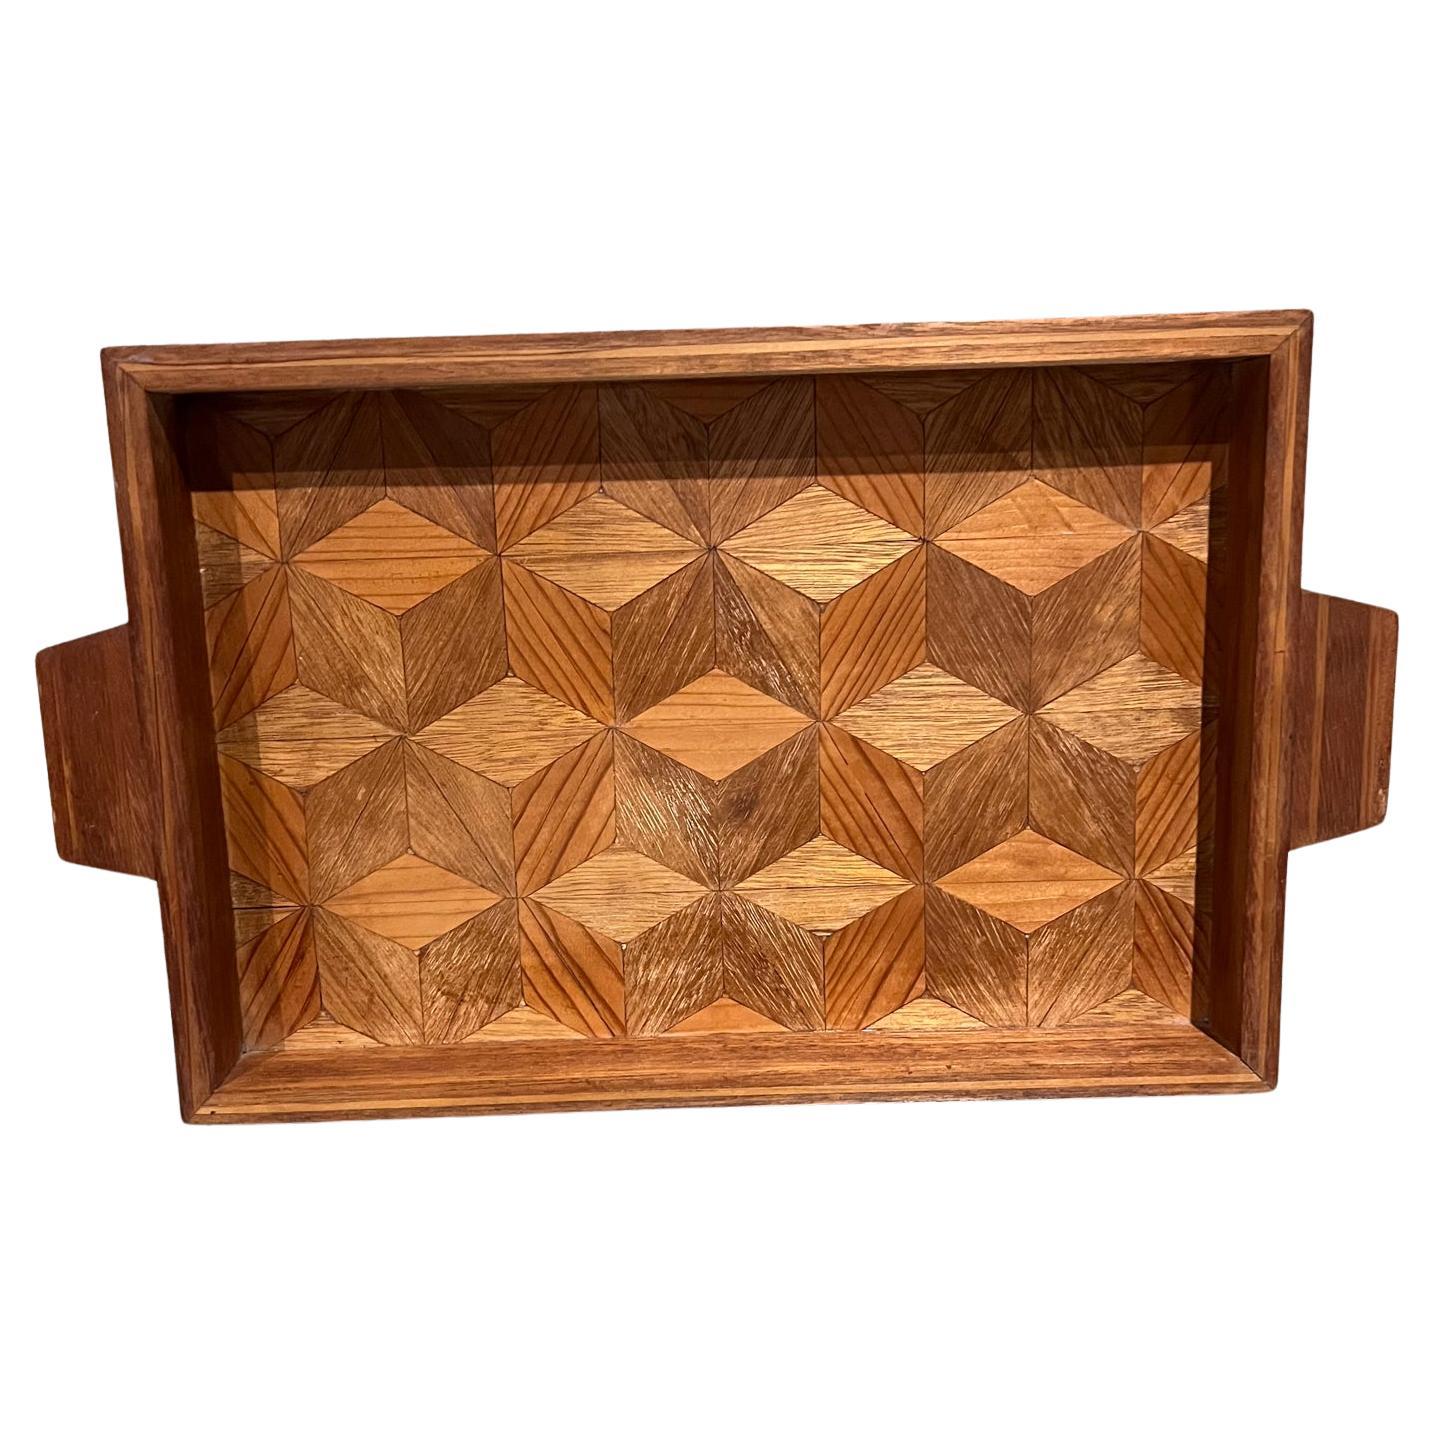 1960s Geometric Wood Serving Tray For Sale